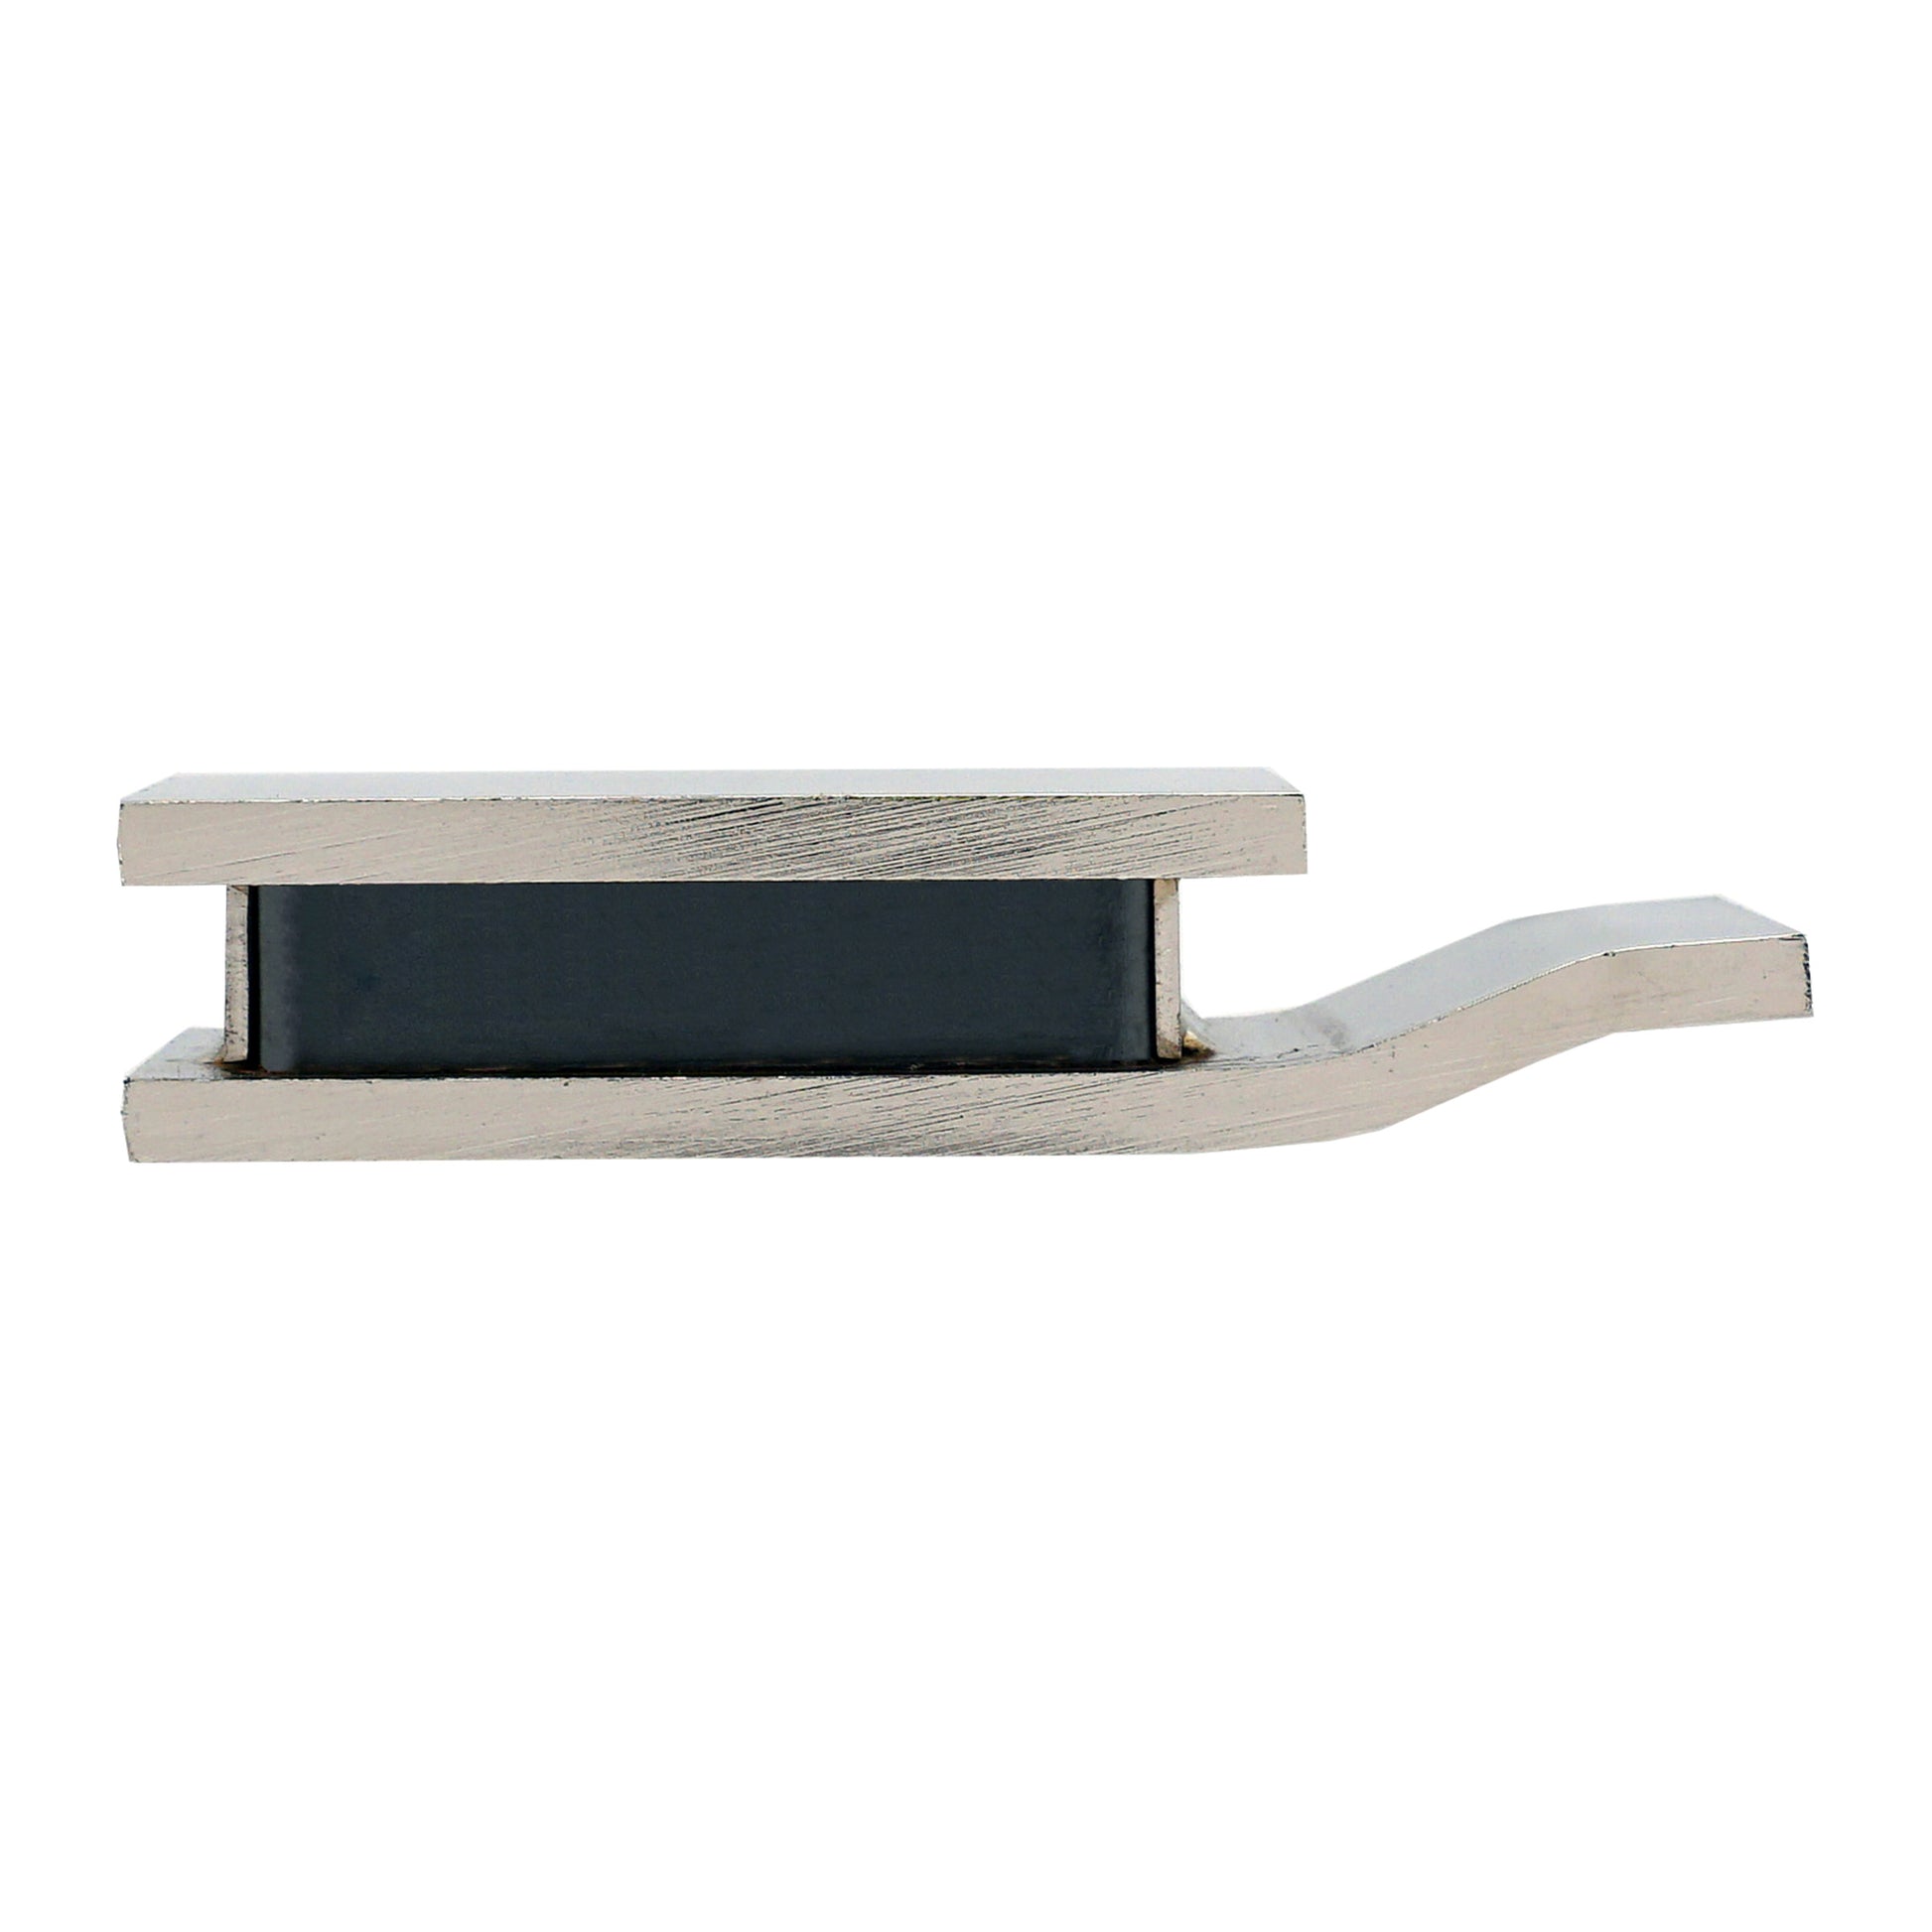 Load image into Gallery viewer, HMC503BNC Channel Letter Trim Cap Holding Magnet - Top View